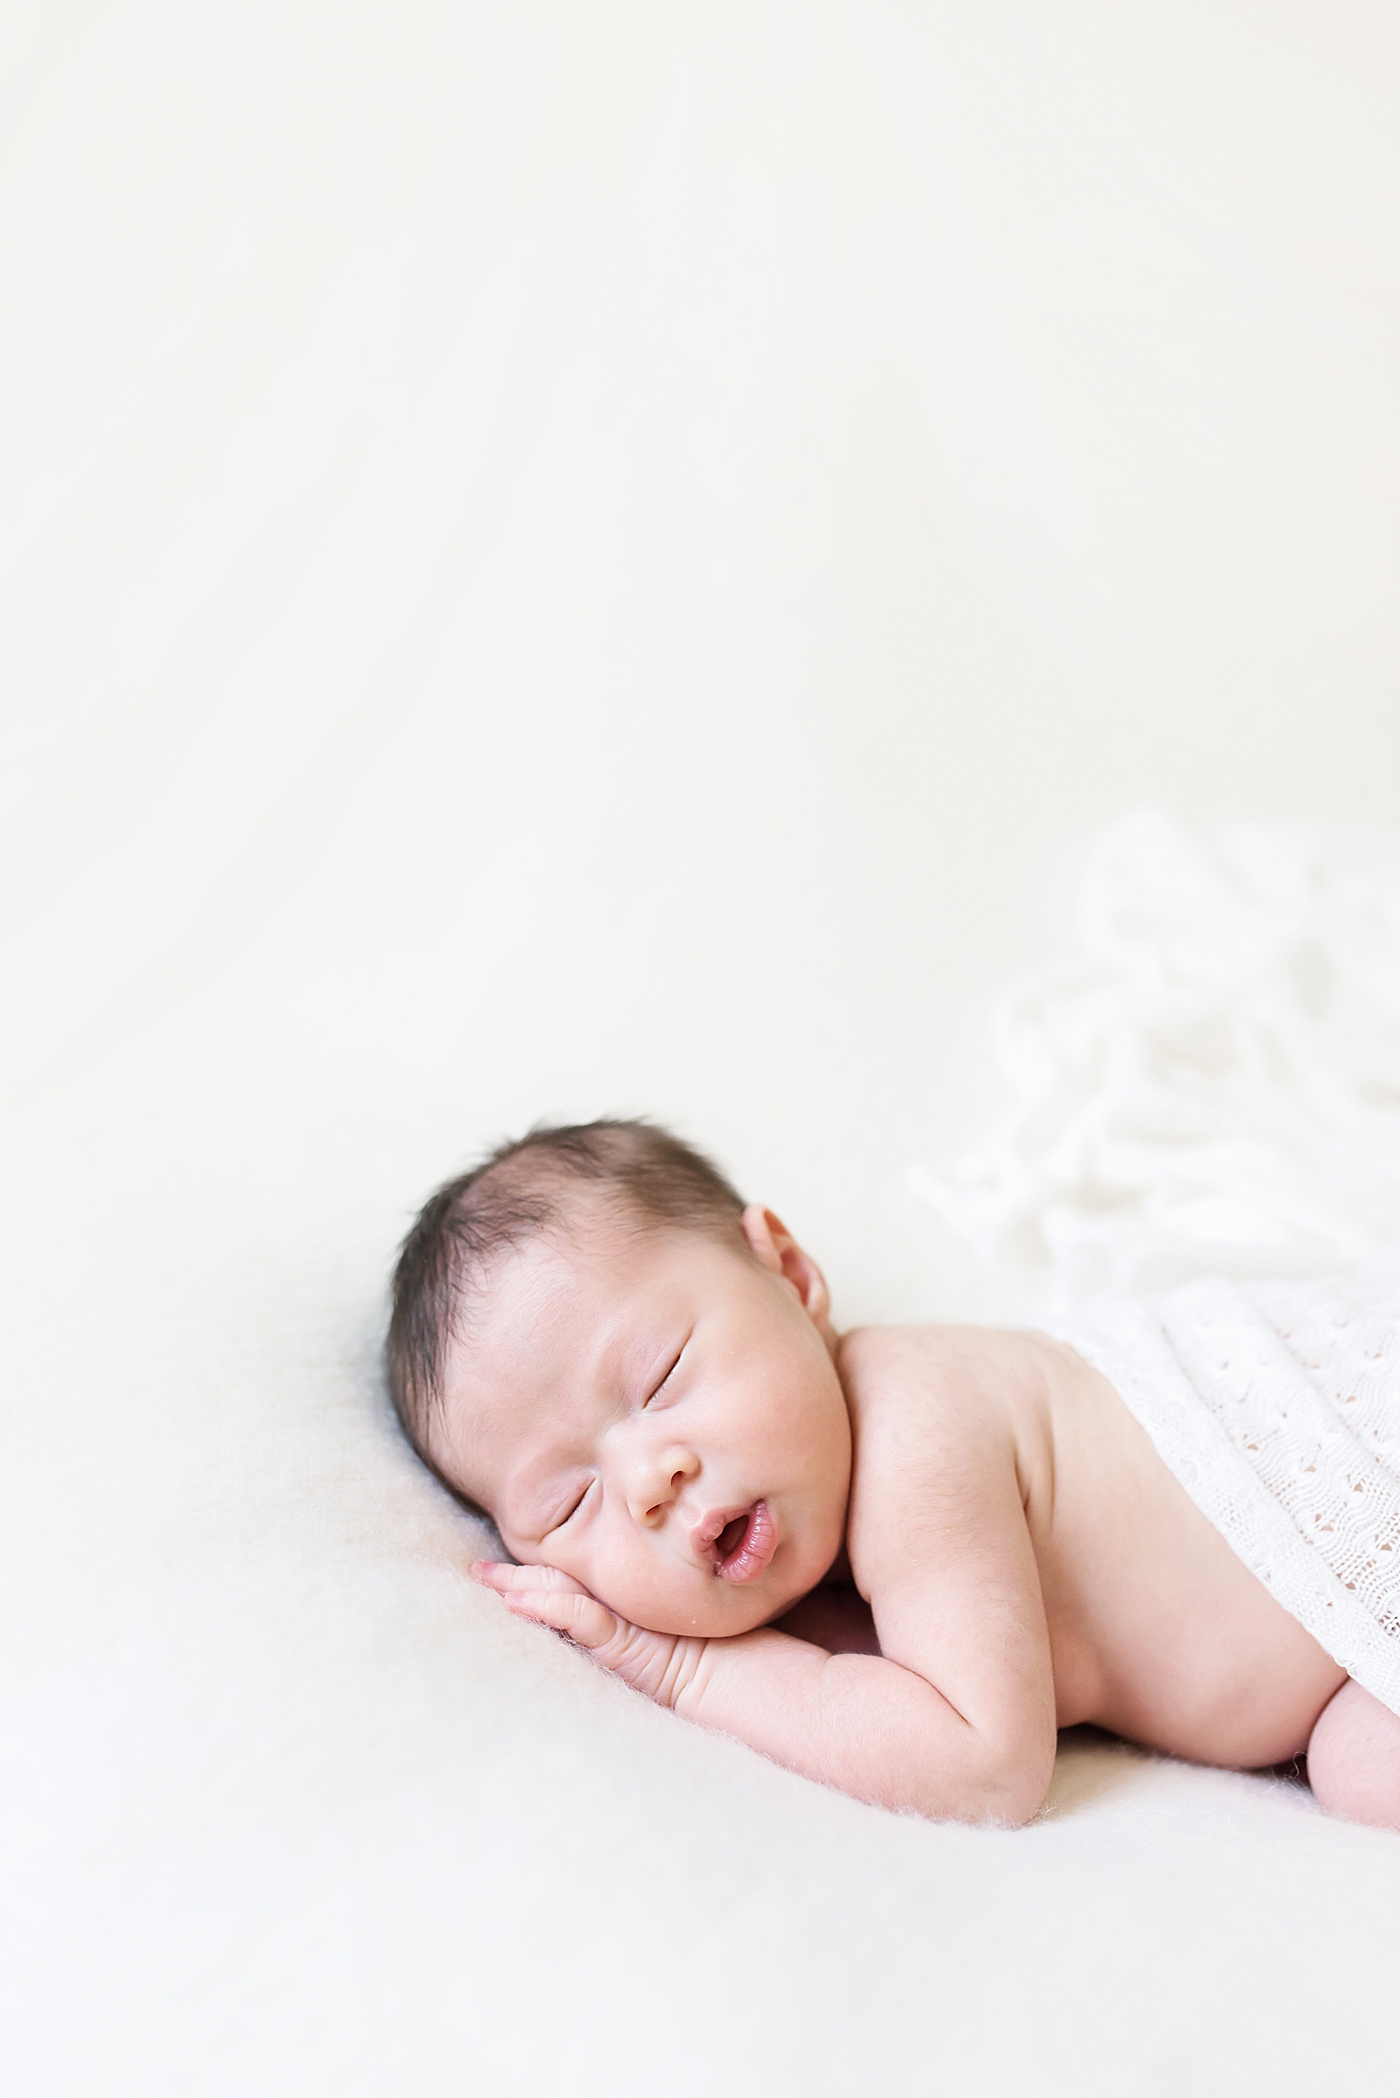 Sleeping newborn baby girl in a white blanket | Photo by Anna Wisjo Photography